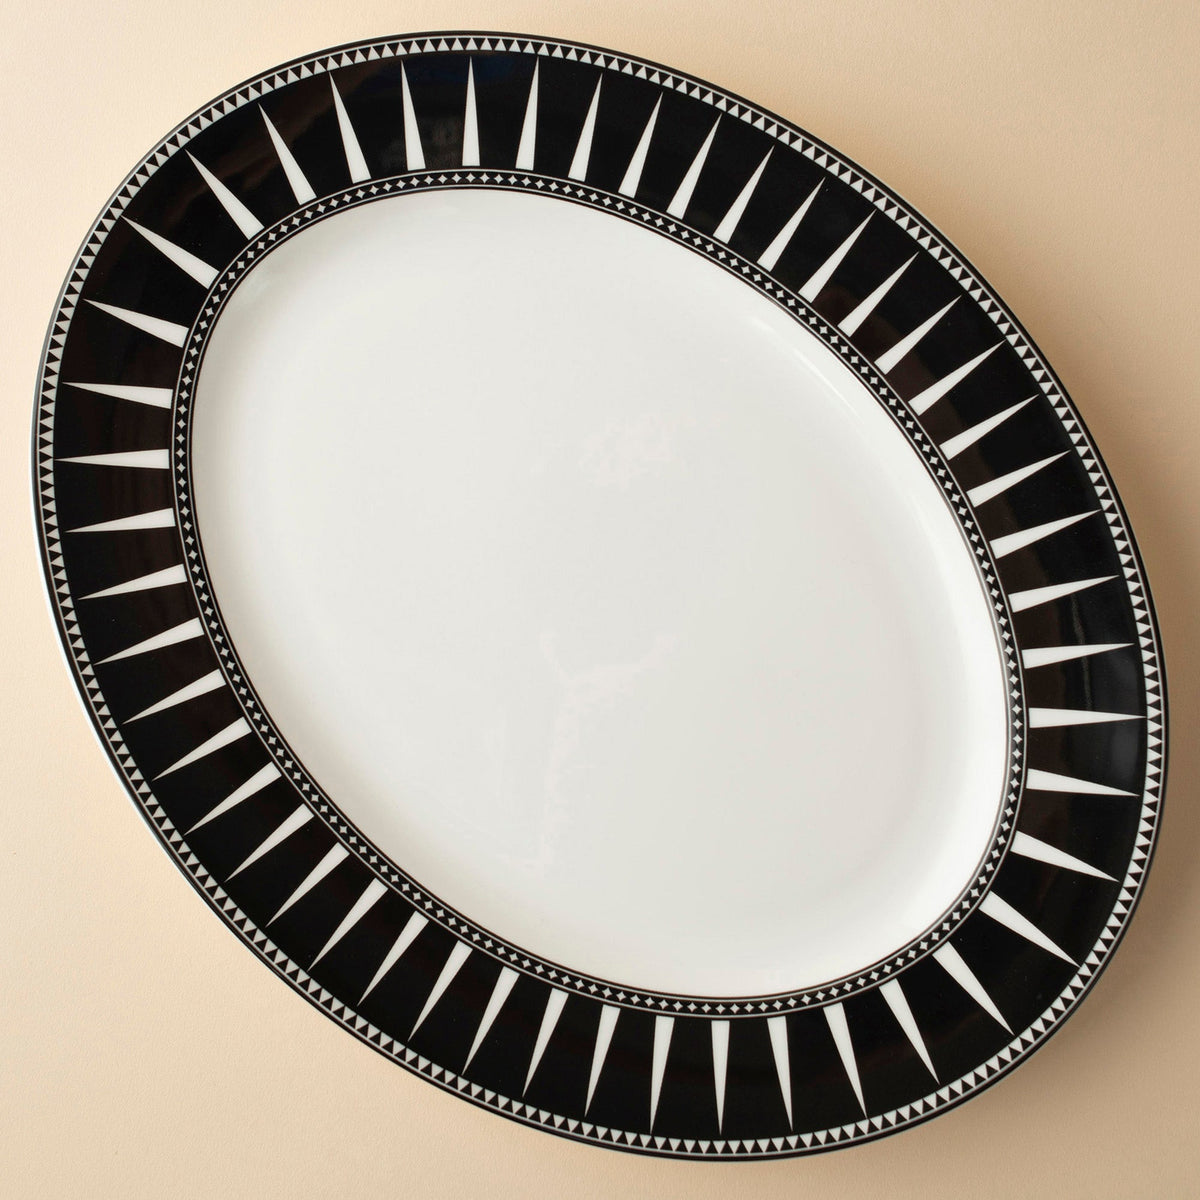 Marrakech Oval Rimmed Platter with a white center and black rim featuring white triangular patterns, reminiscent of Moroccan-inspired ceramics, by Caskata Artisanal Home.